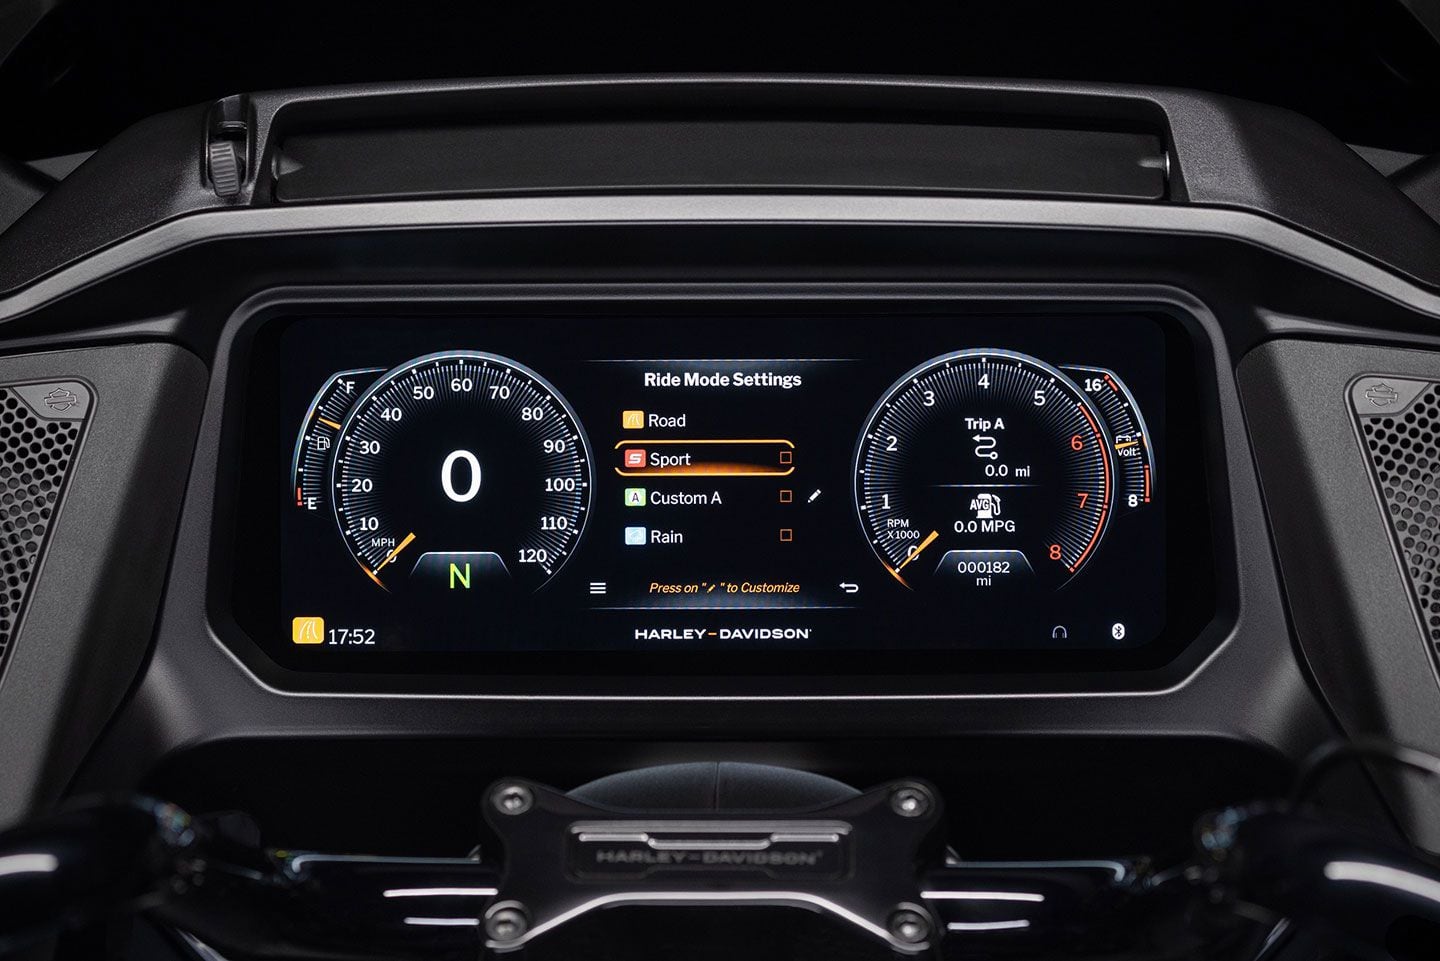 The Skyline OS is behind the infotainment on the 12.3-inch TFT touchscreen, but you can also access ride settings here to adjust power delivery, engine-braking, Cornering Antilock Braking System (C-ABS), and Cornering Traction Control System (C-TCS).